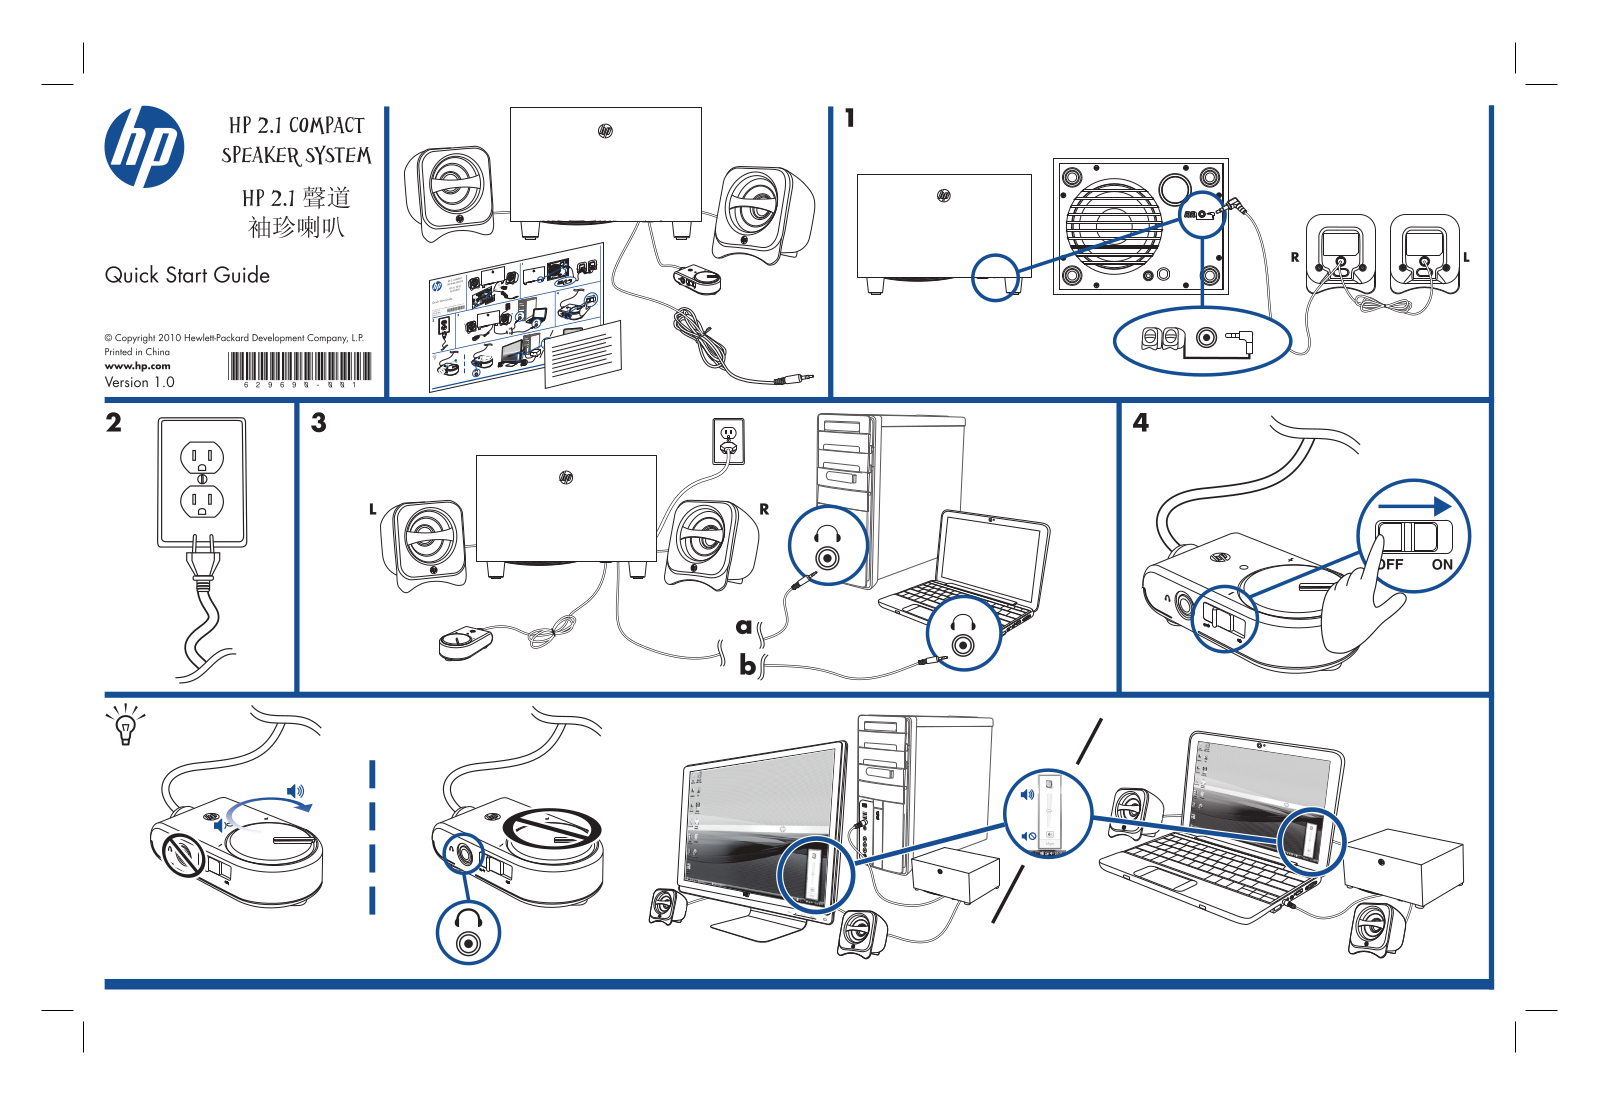 HP 2.1 Compact Speaker System Quick Start Guide